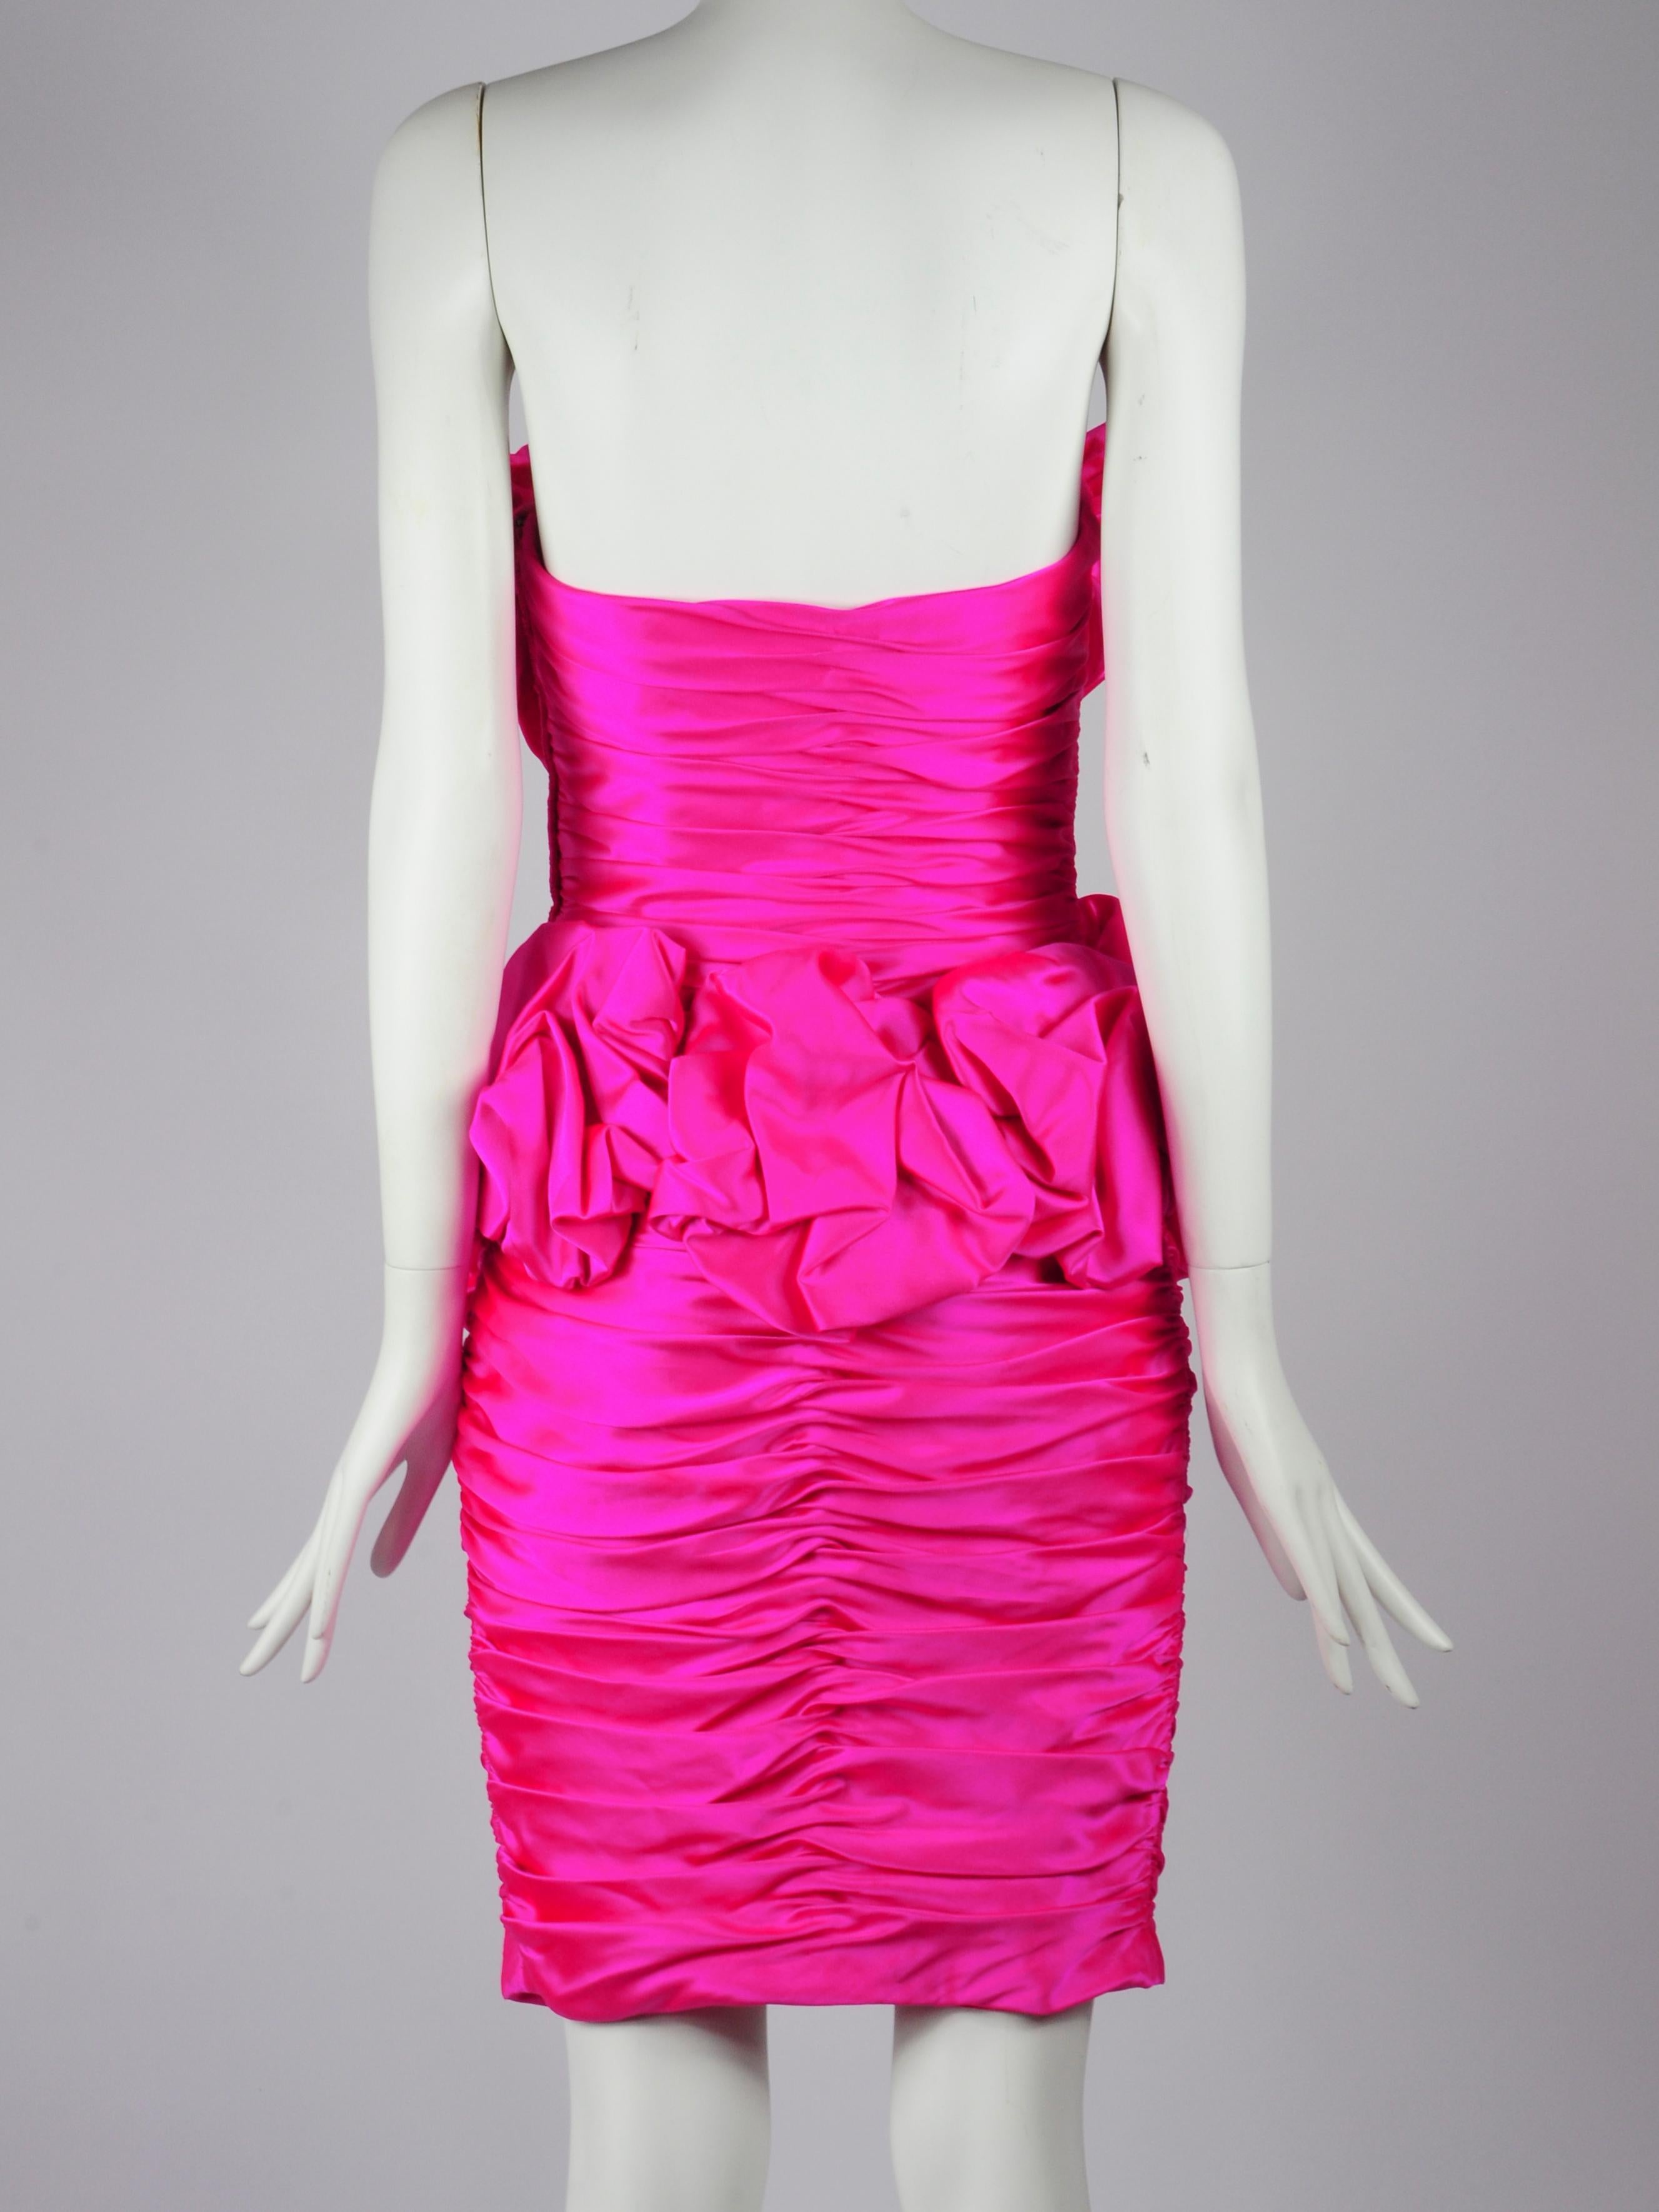 Vicky Tiel Silk Couture Cocktail Dress in Fuchsia Pink 1980s For Sale 6